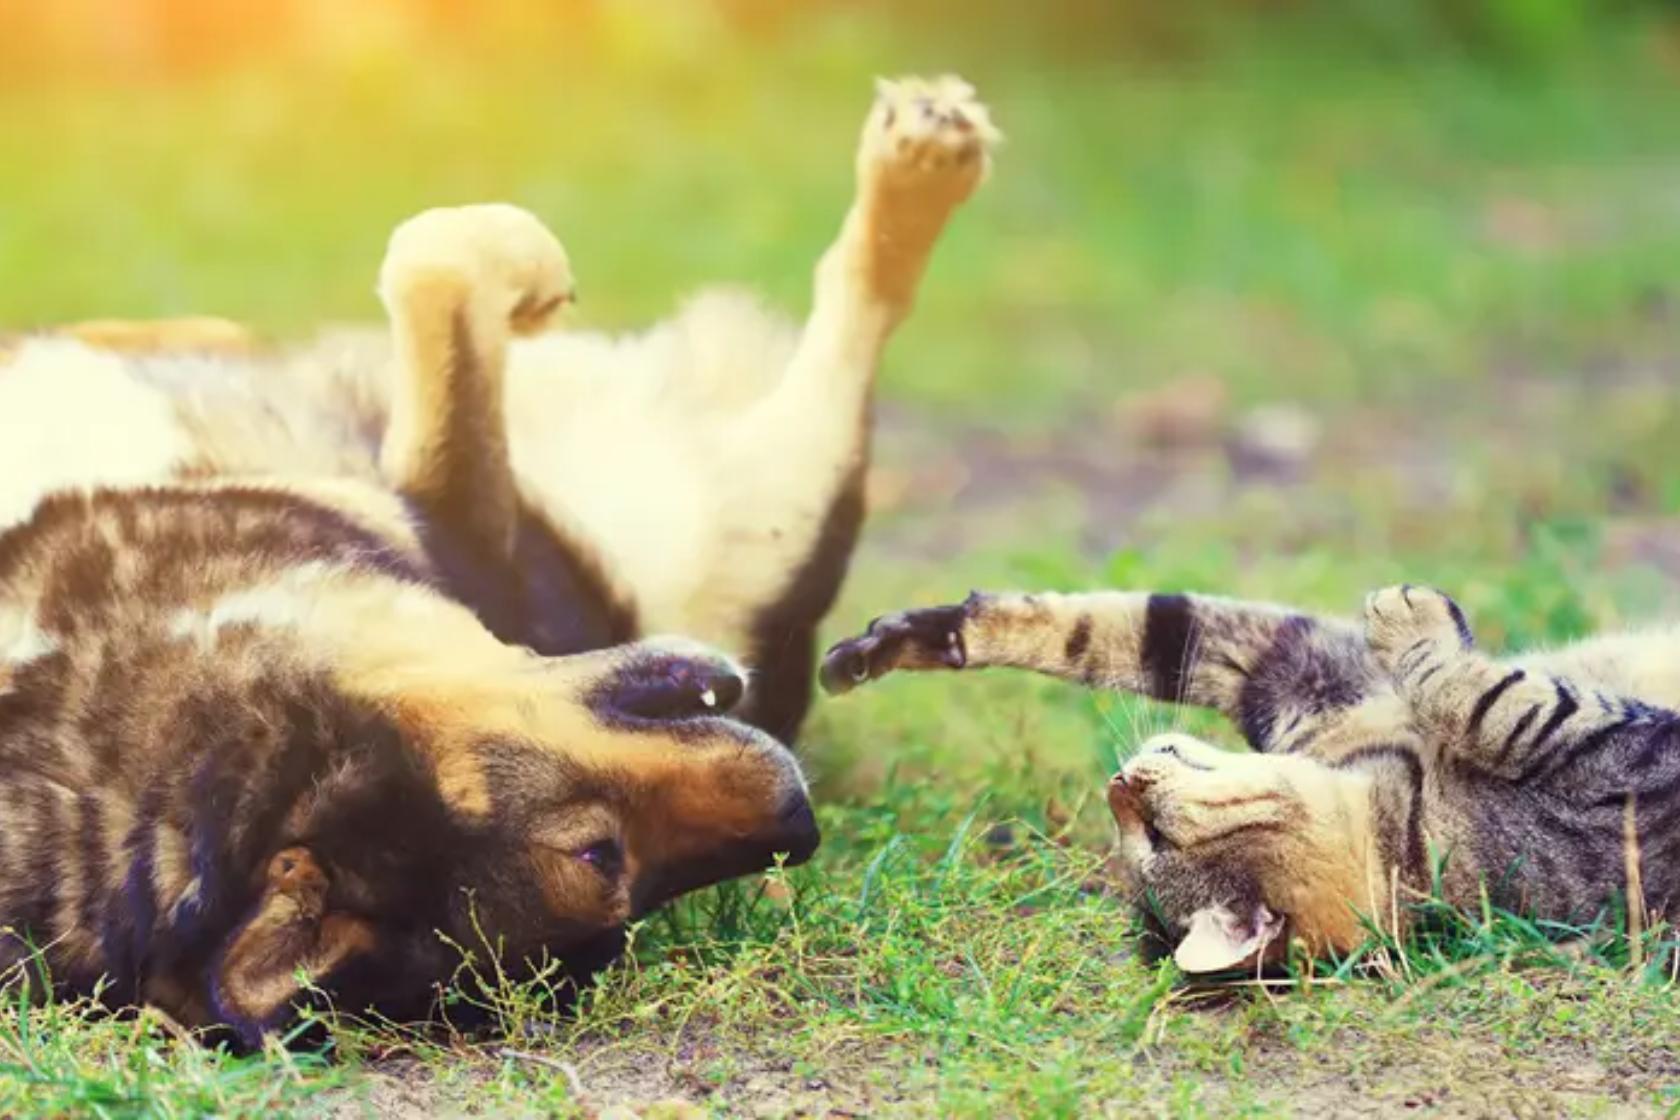 Dog and cat playing together on grass